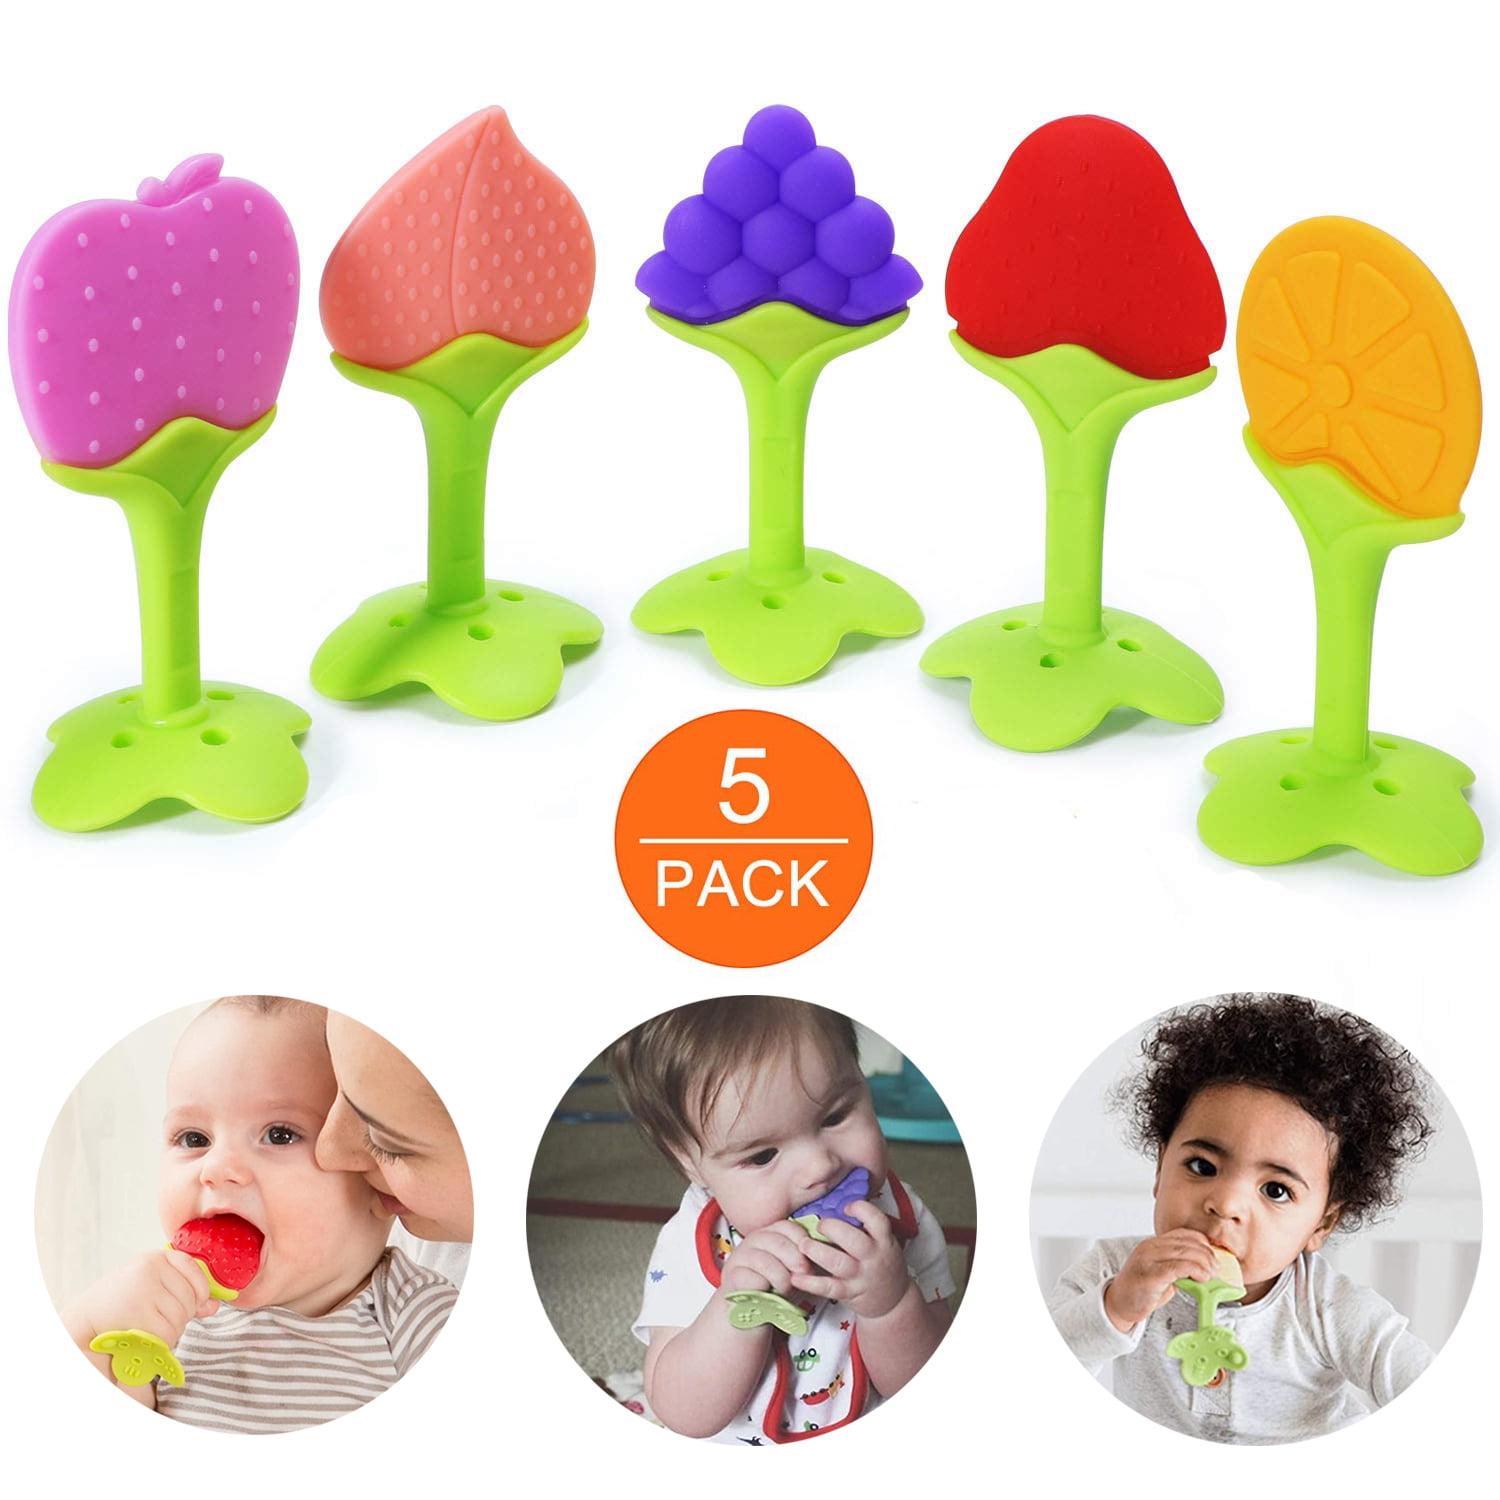 BPA Free and FDA Approved for Infant Toddler 5 Pack of Cute Fruit Teethers Freezable and Flexible Safe Silicone Teething Toys for Boys and Girls and Baby Use 